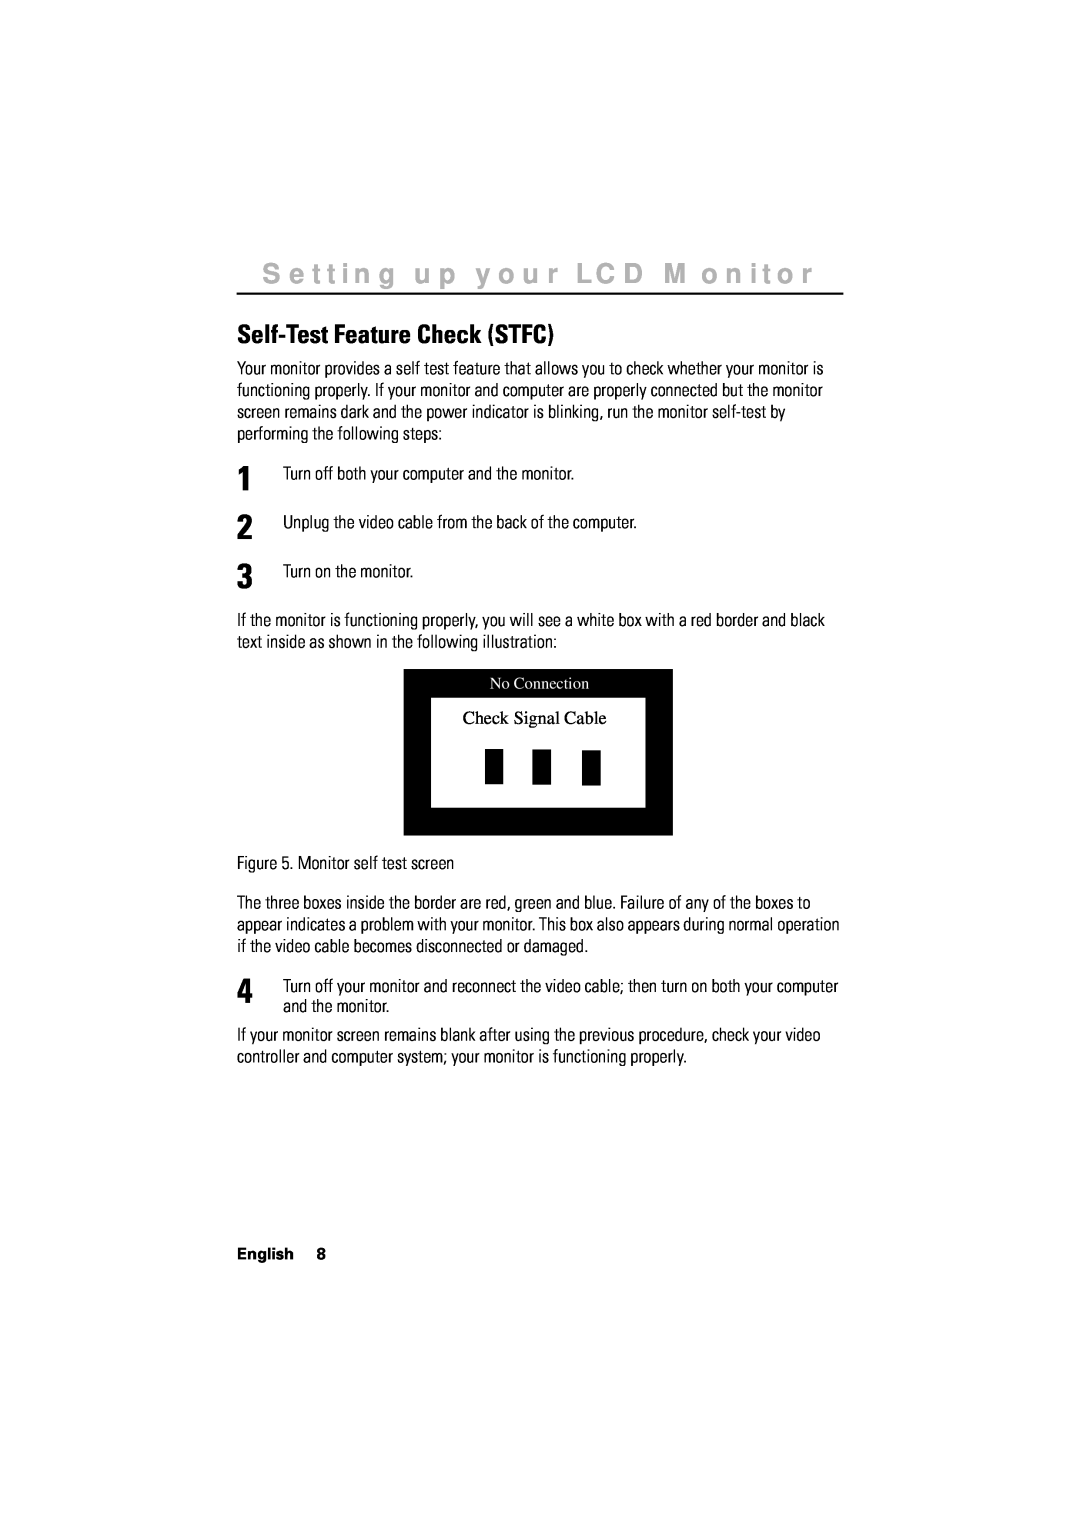 Samsung 170T manual Self-Test Feature Check STFC, Setting up your LCD Monitor, Check Signal Cable, No Connection, English 